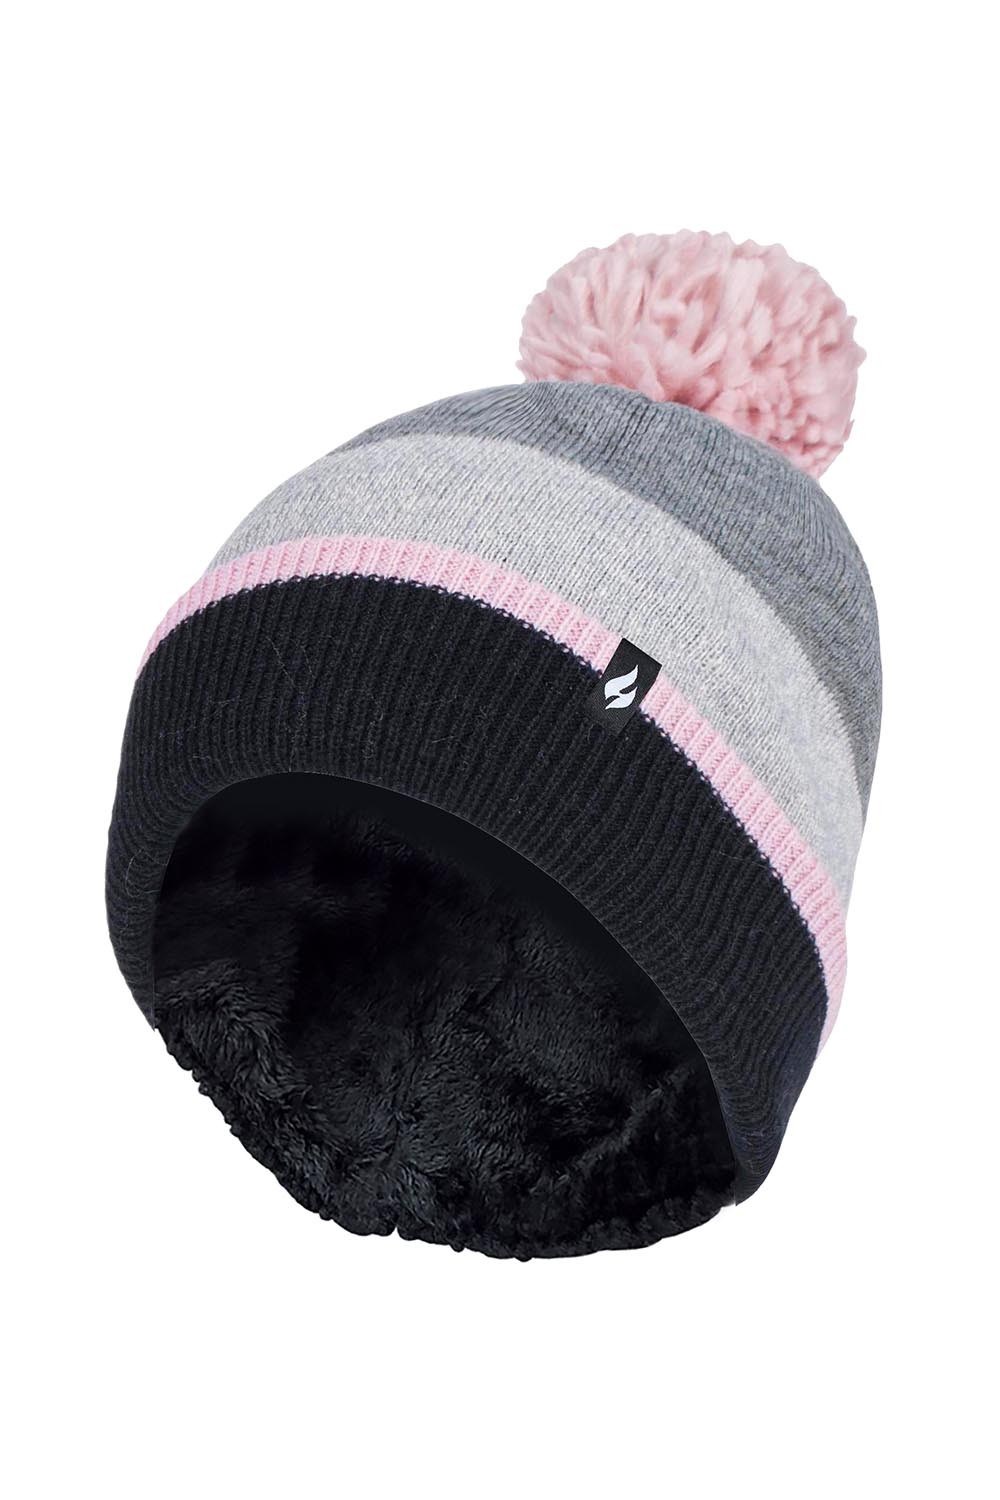 Womens Thermal Striped Winter Pom Hat -